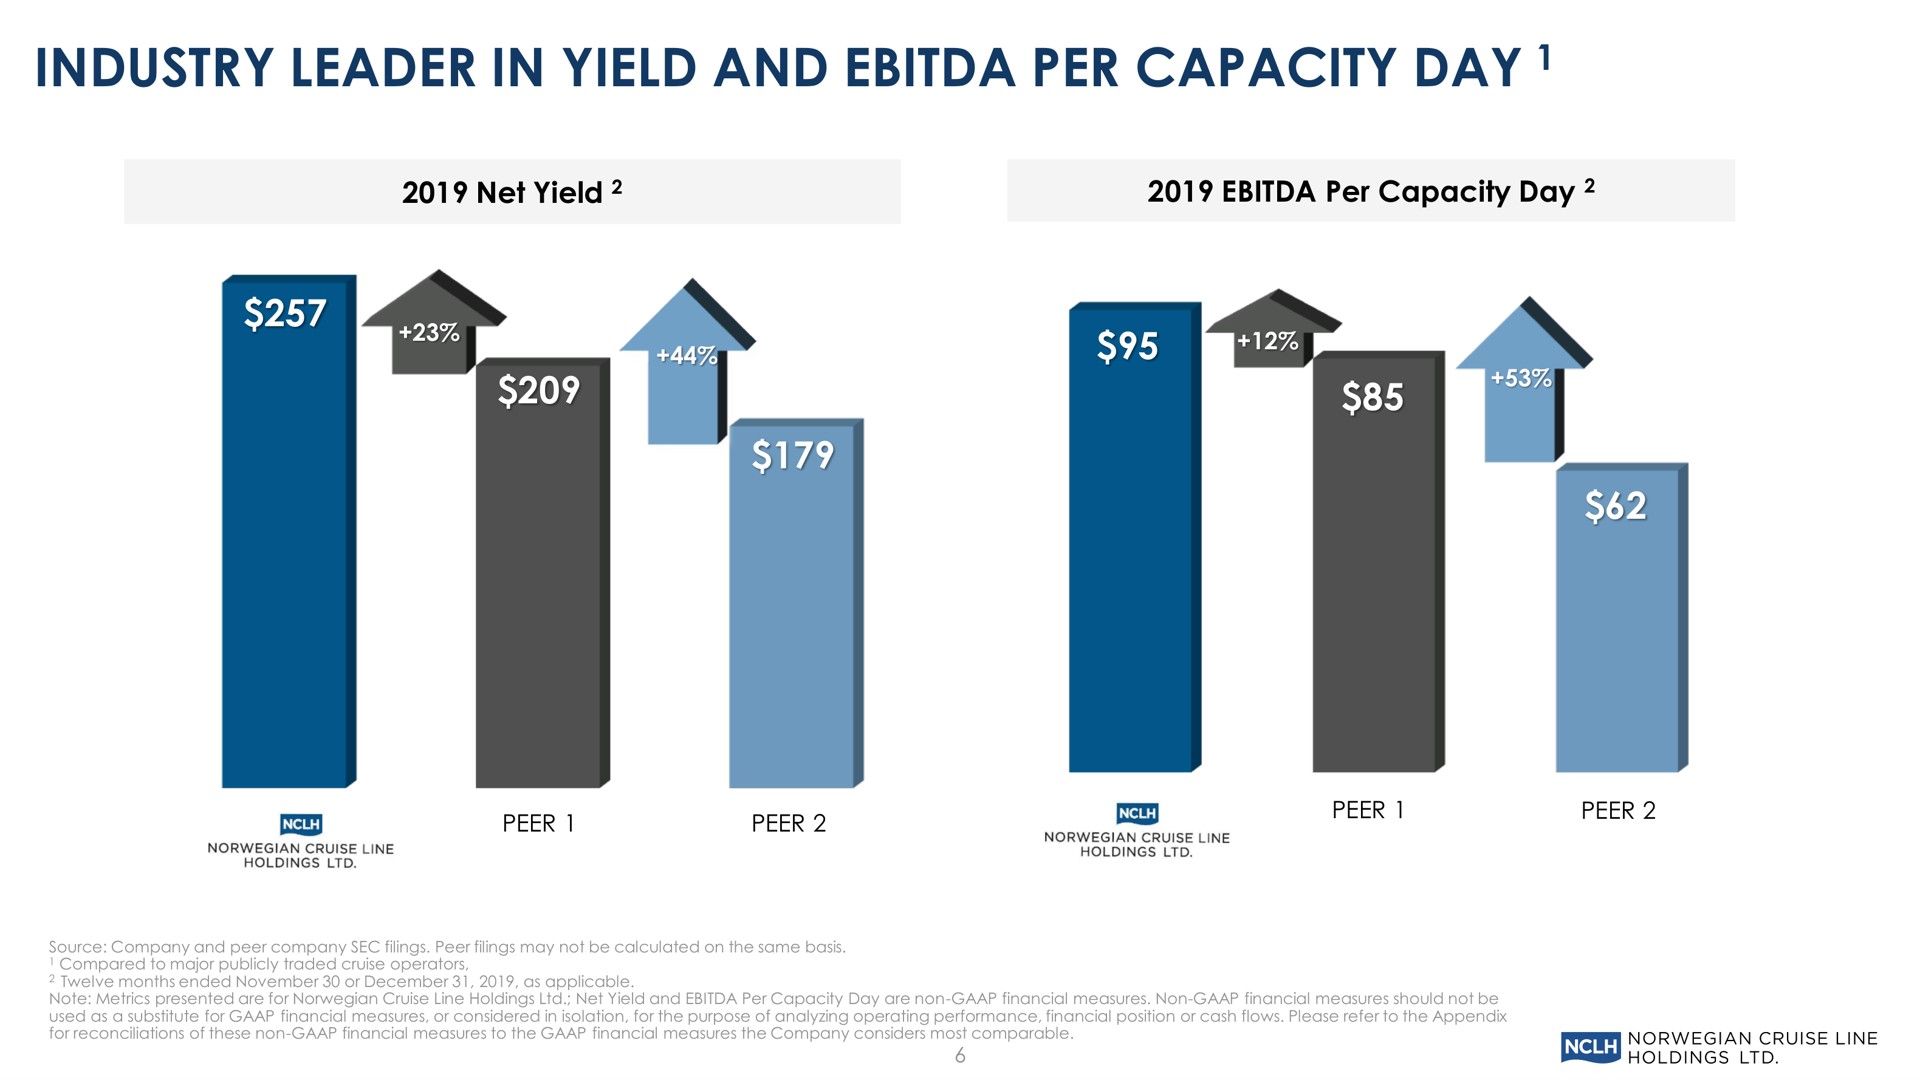 industry leader in yield and per capacity day | Norwegian Cruise Line